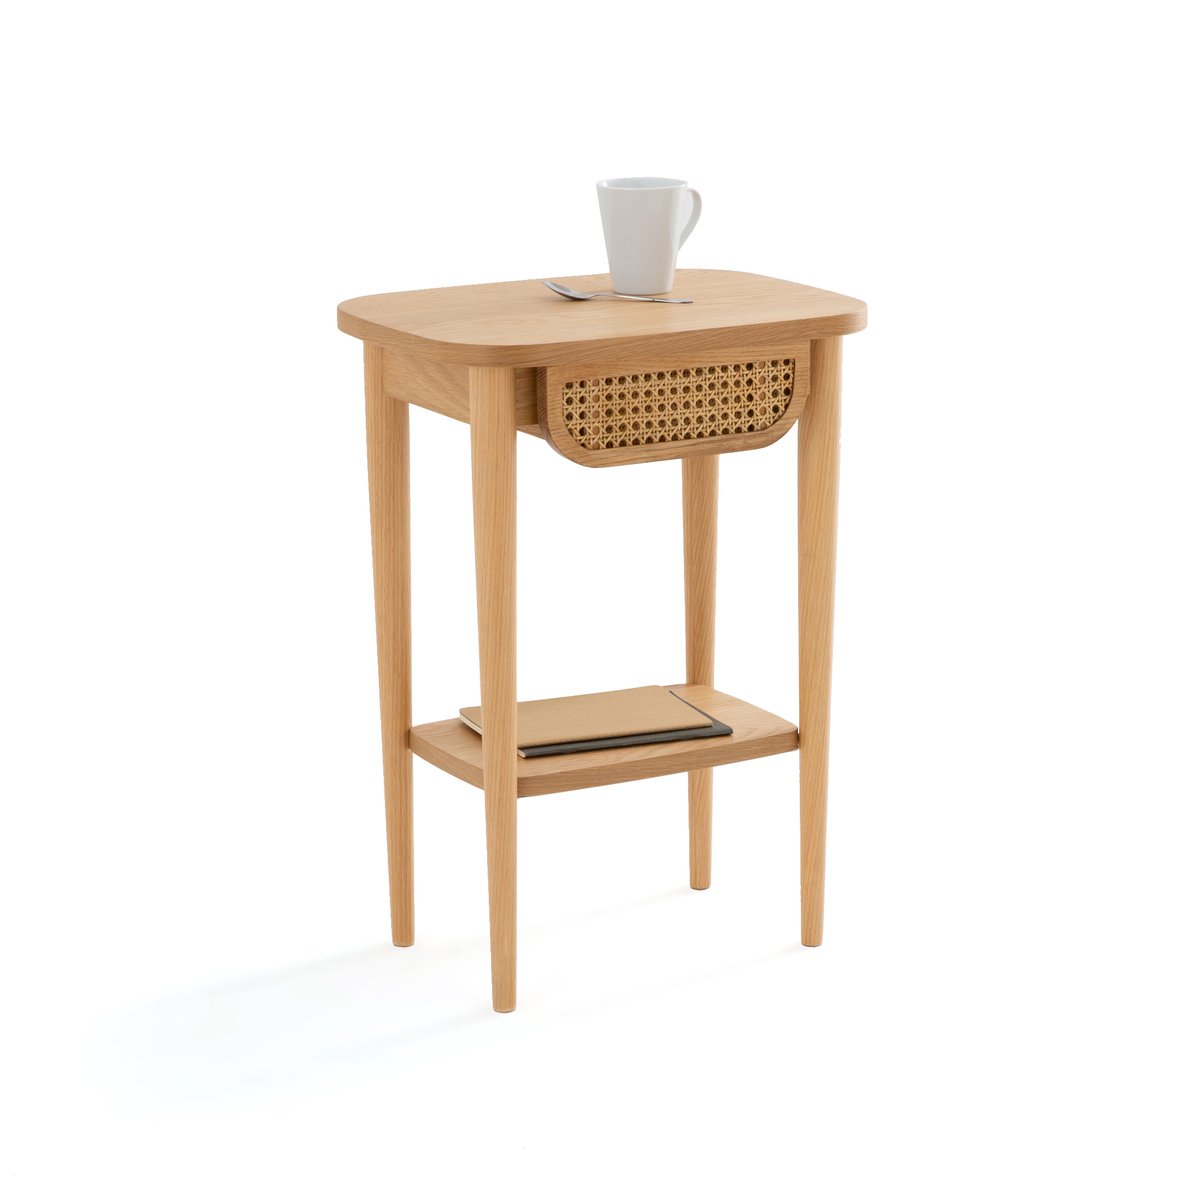 Image of Buisseau Cane Bedside/End Table